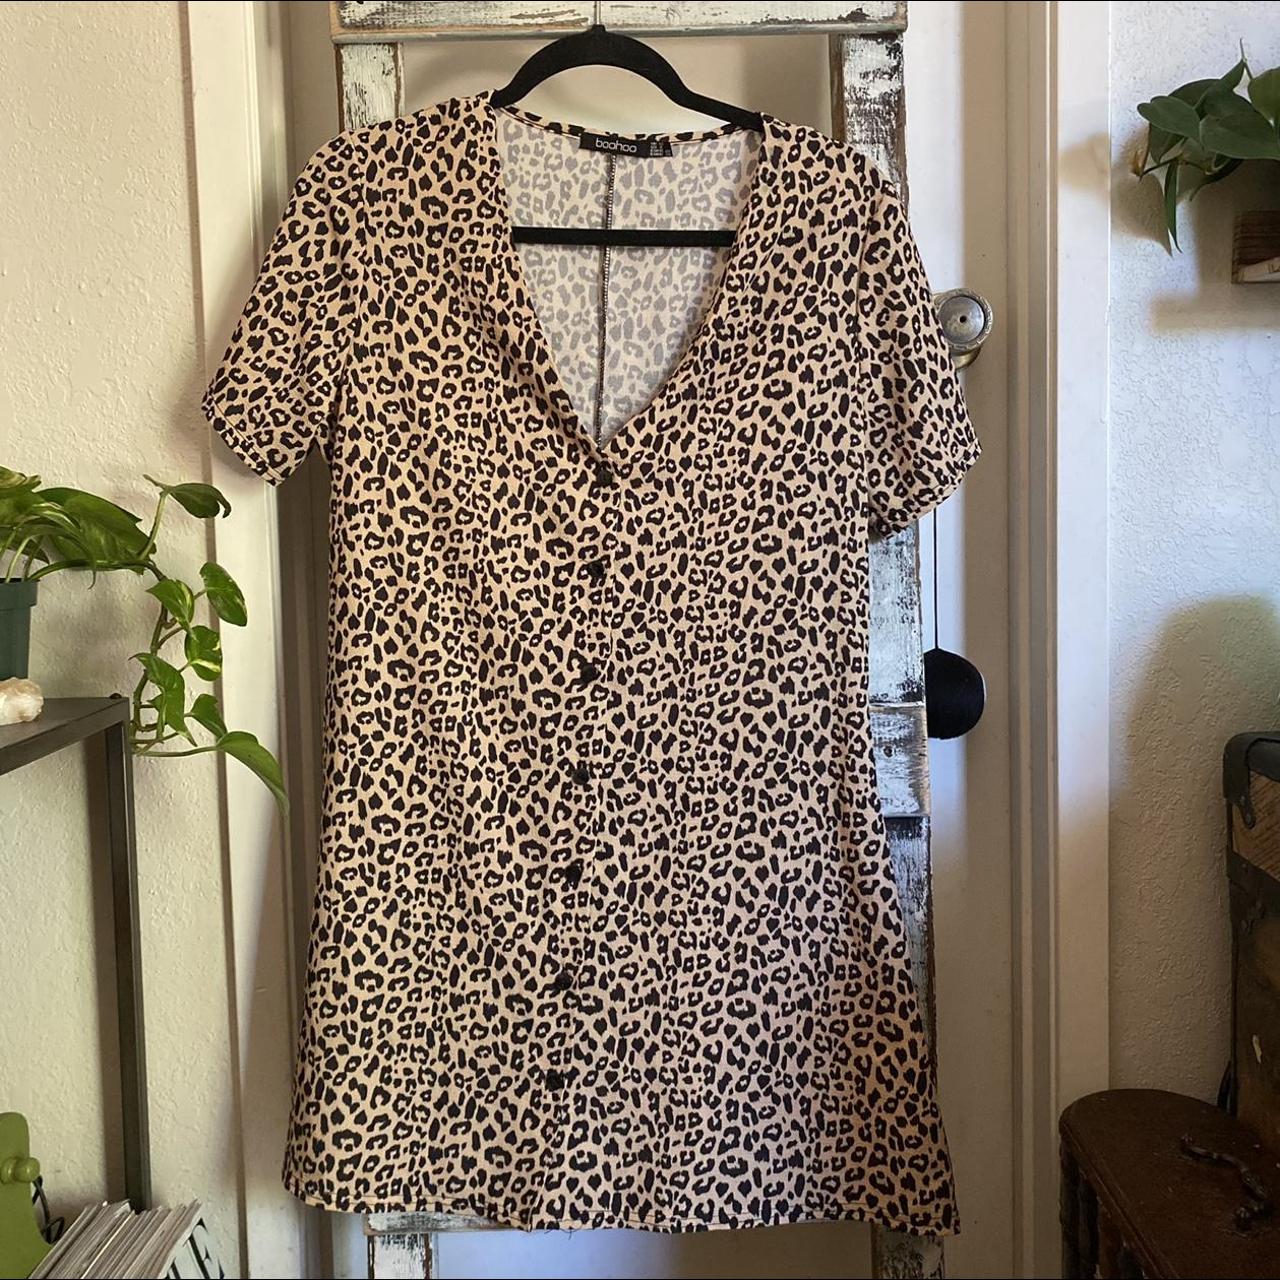 Product Image 1 - Boohoo leopard print button dress

very